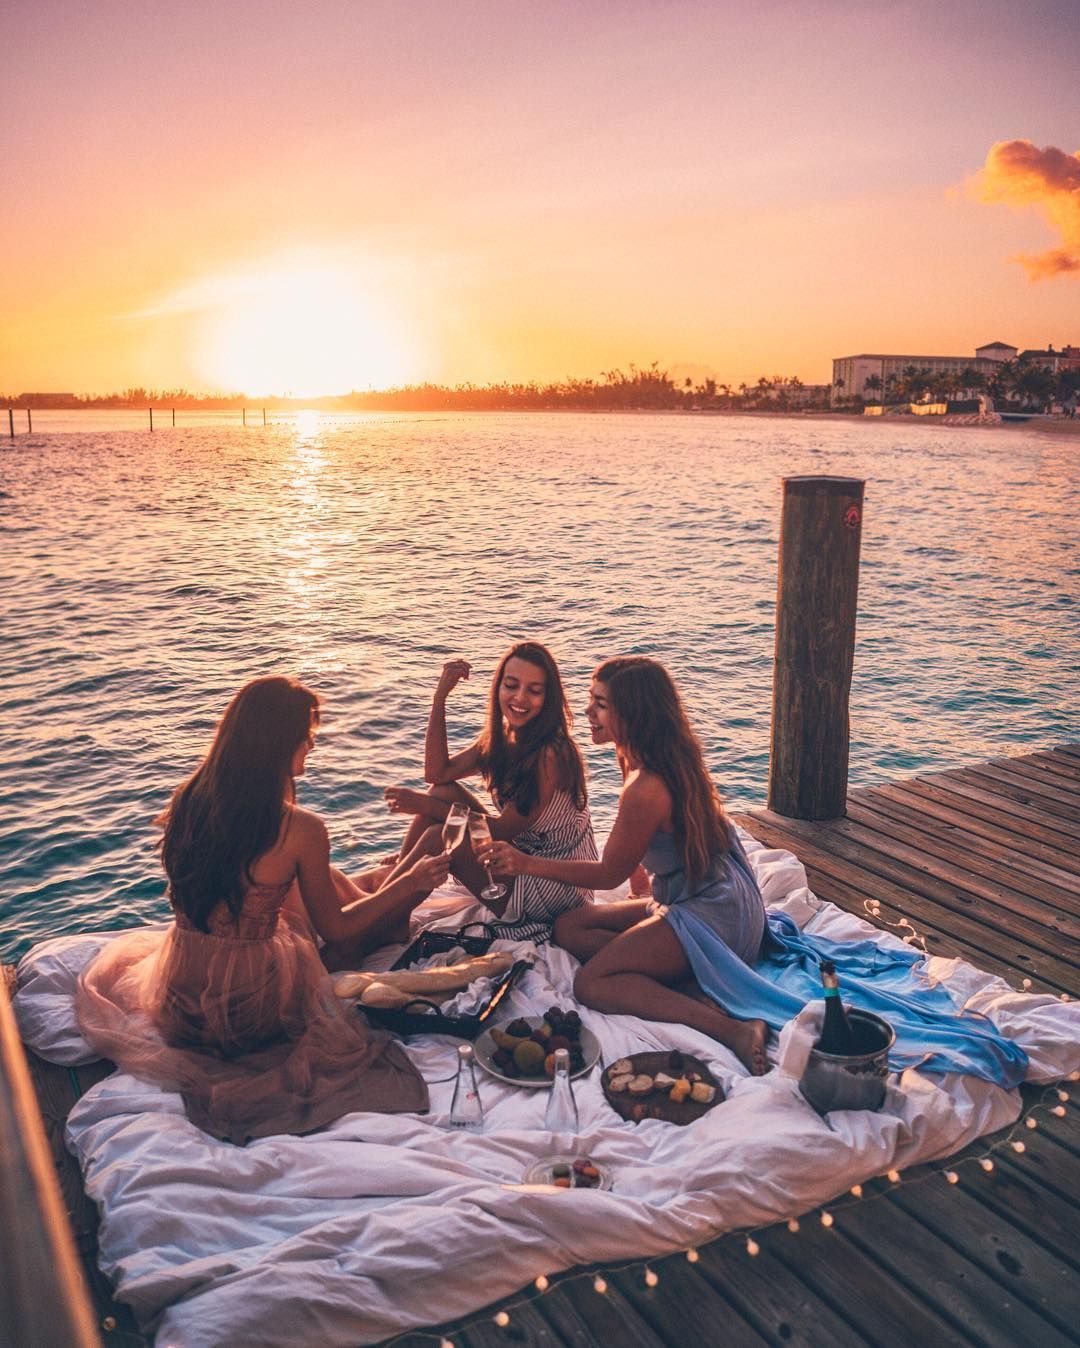 AWAY LANDS ? Travel + Fashion on Instagram: “Champagne at sunrise. вњЁ” -   14 holiday Goals friends ideas